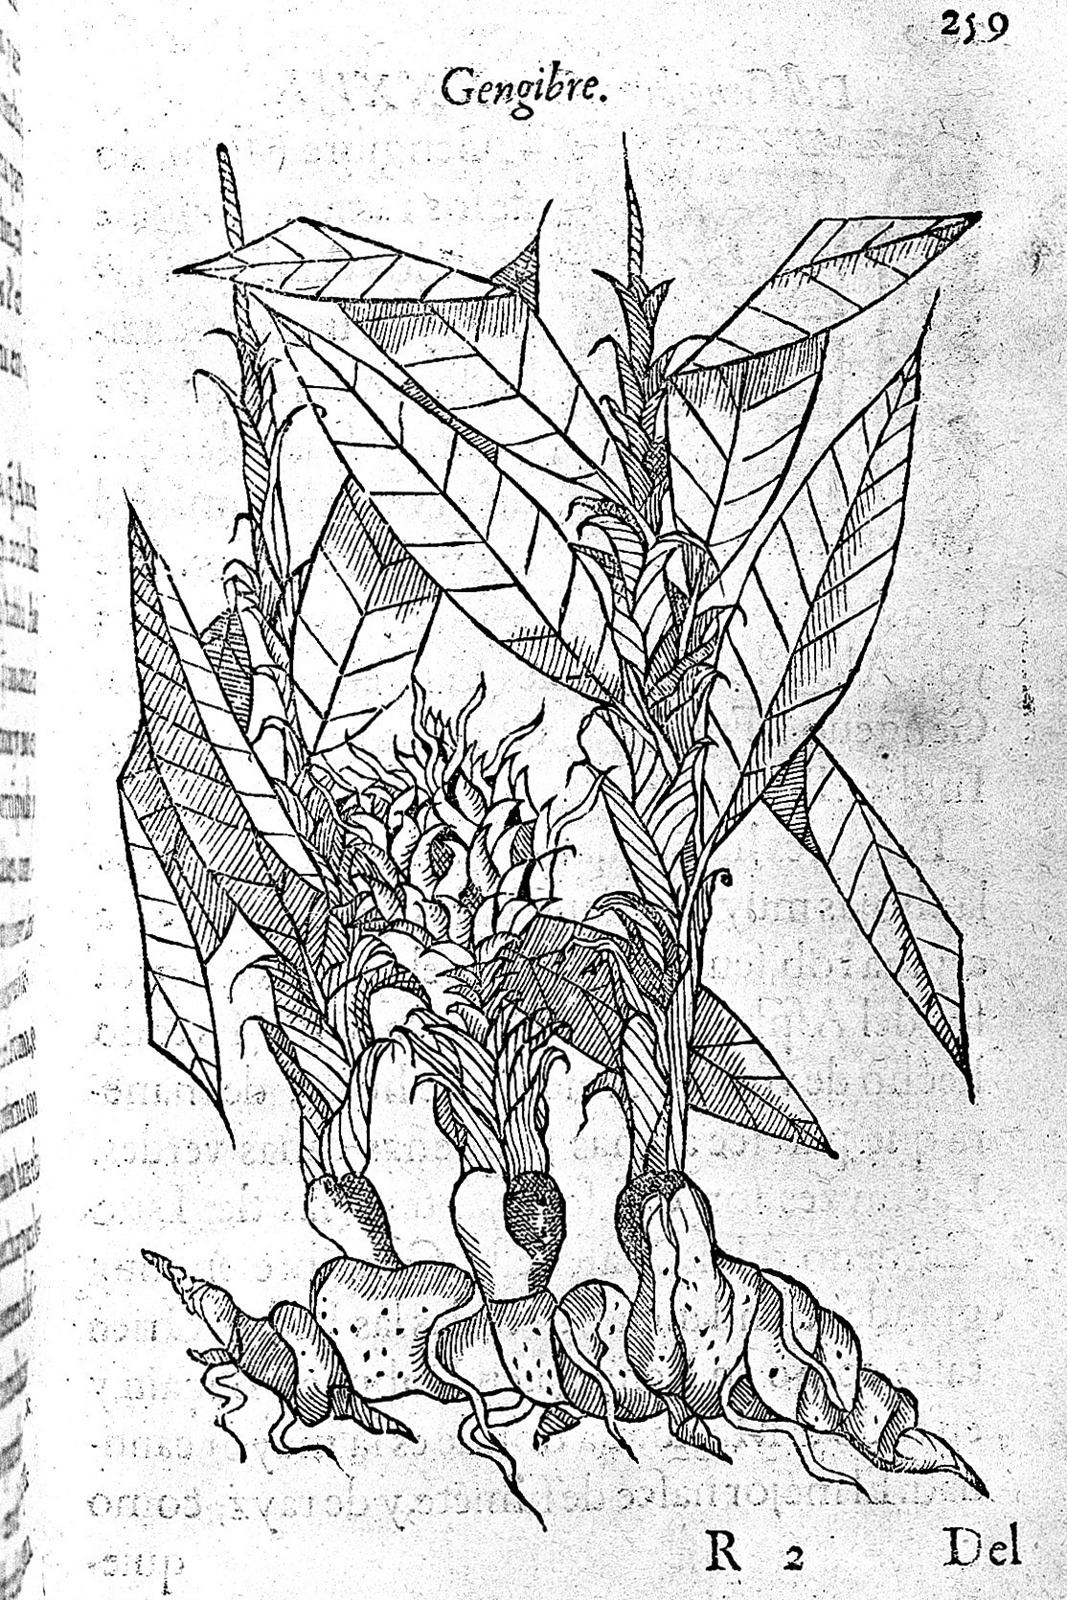 Photograph of a single page from a book showing a page-size, black and white engraving of a plant.